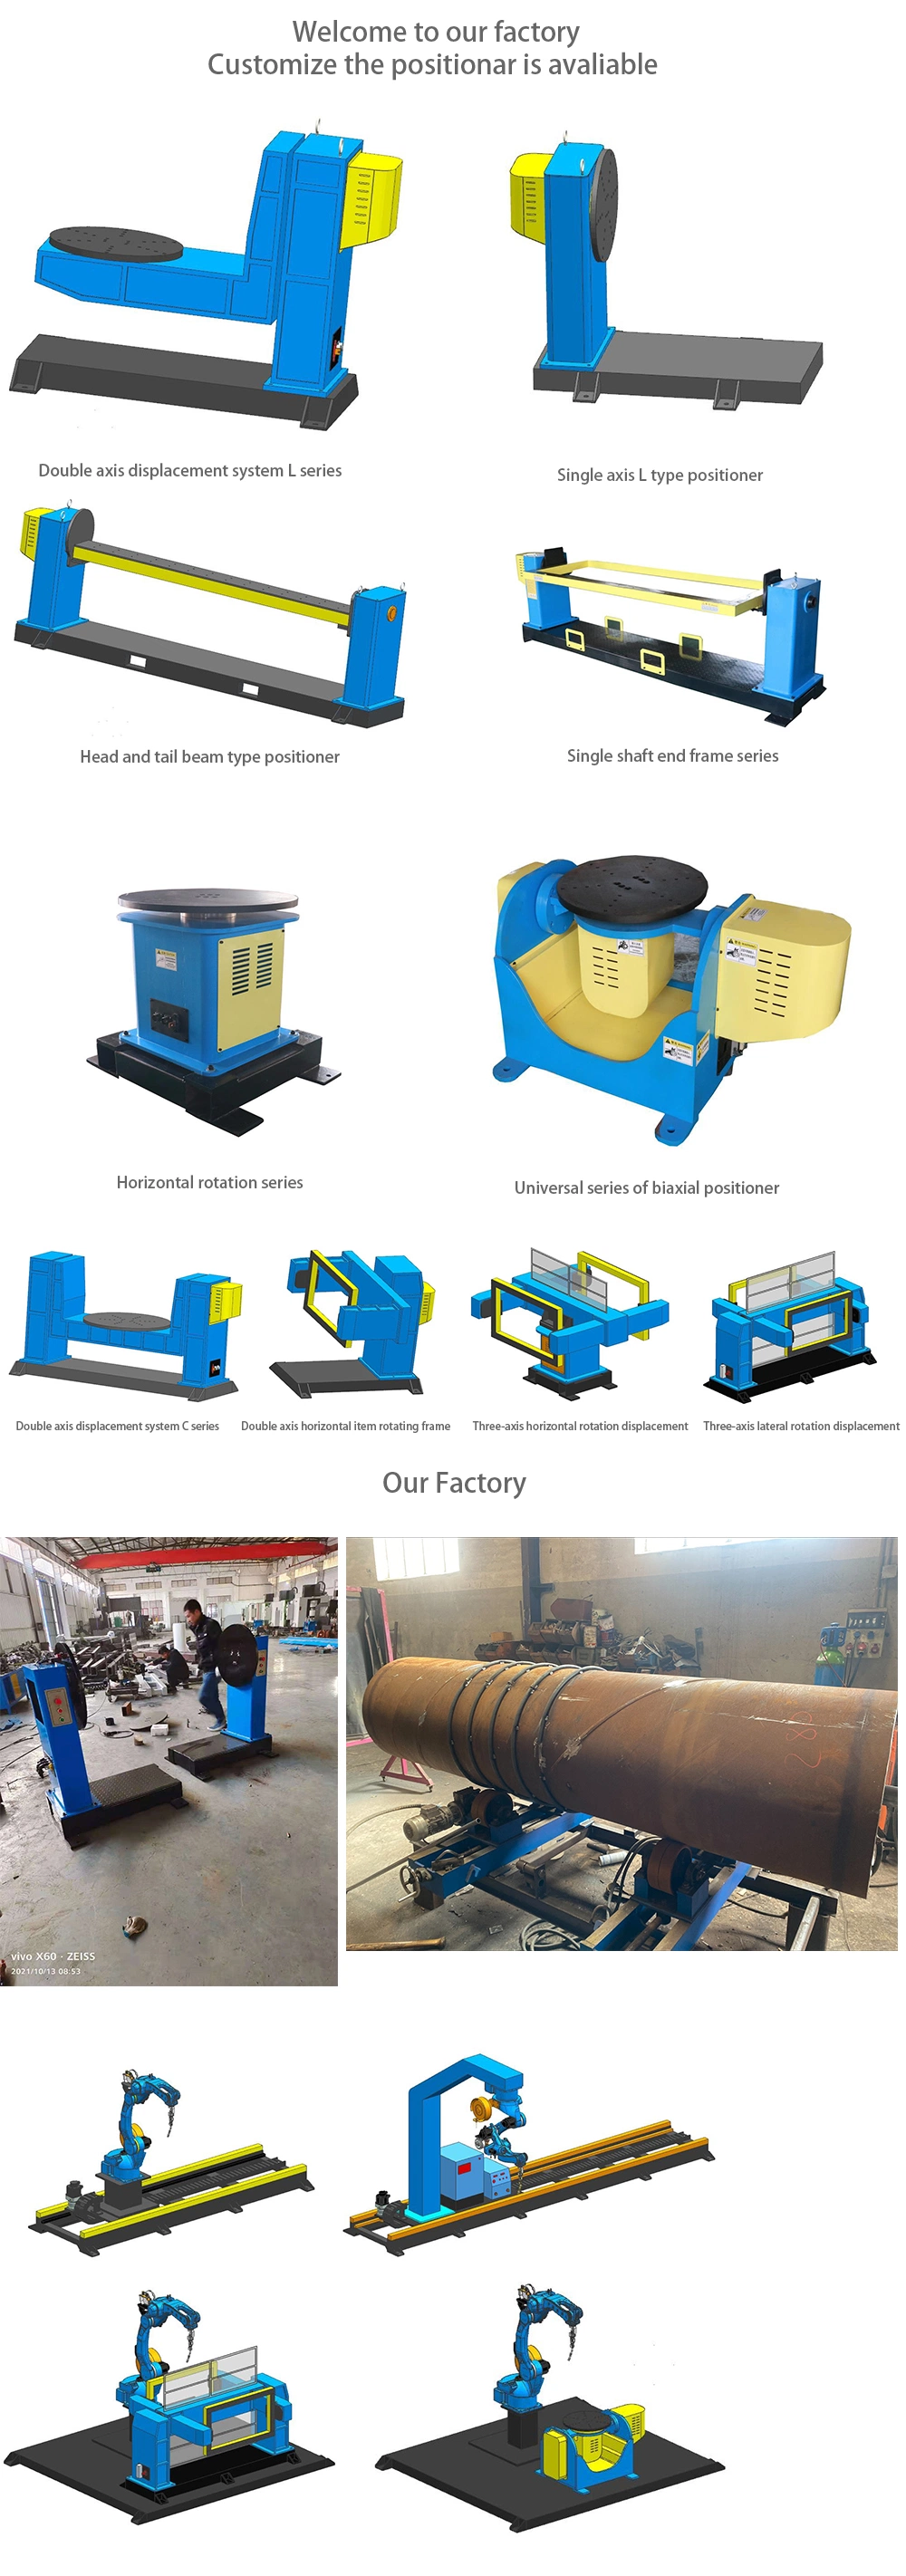 Single Axis L Type Positioner Payload 1000kg Rotary Welding Positioner Welding Positioner Turntable